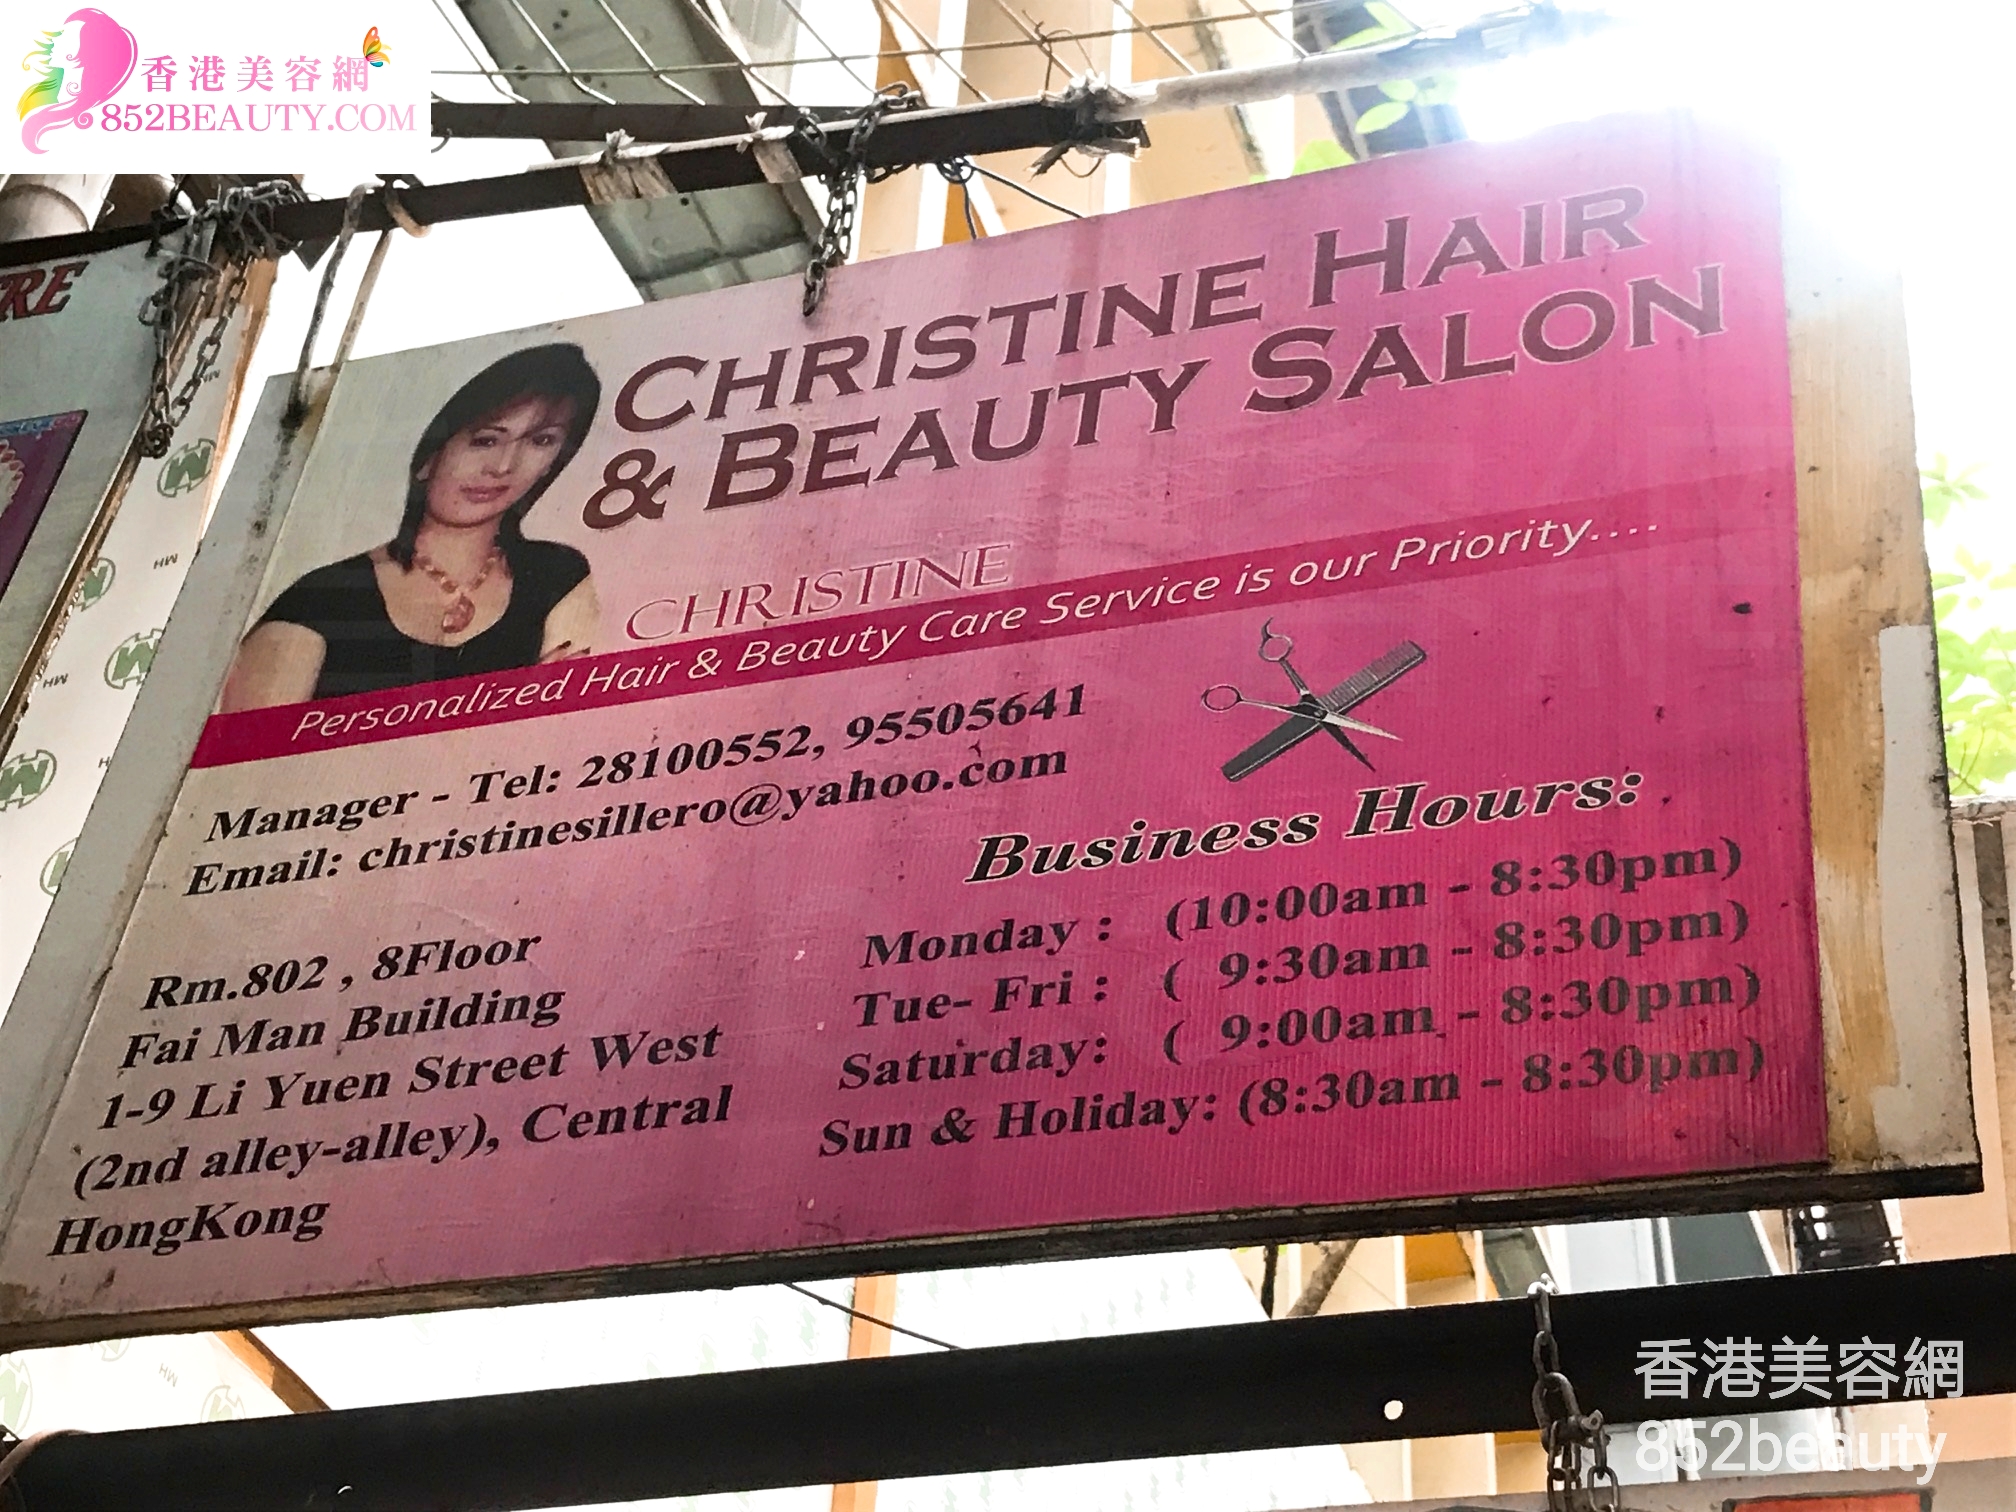 Hand and foot care: Christine Beauty Salon